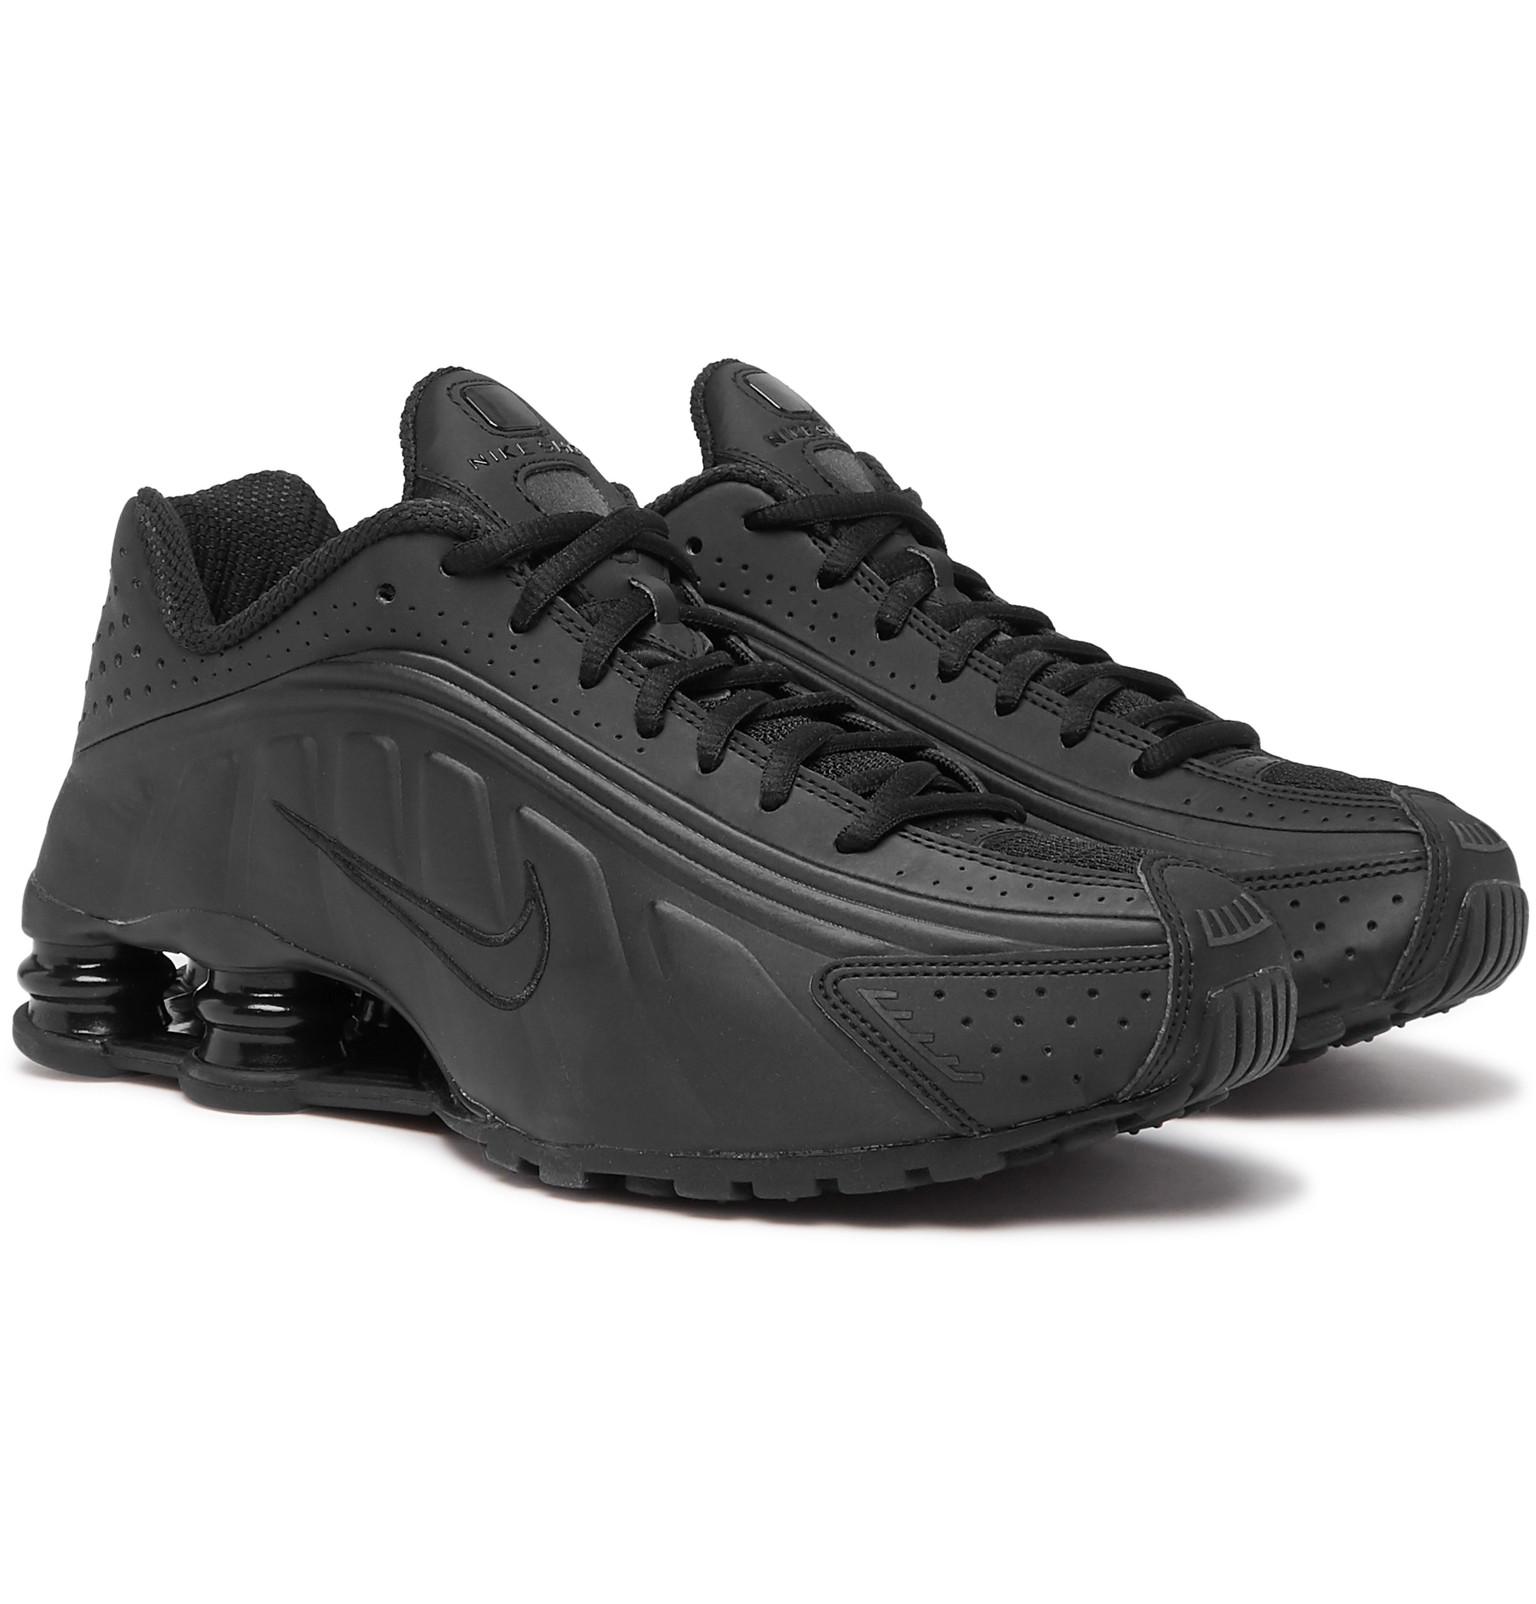 Lyst - Nike Shox R4 Mesh-trimmed Faux Leather Sneakers in Black for Men